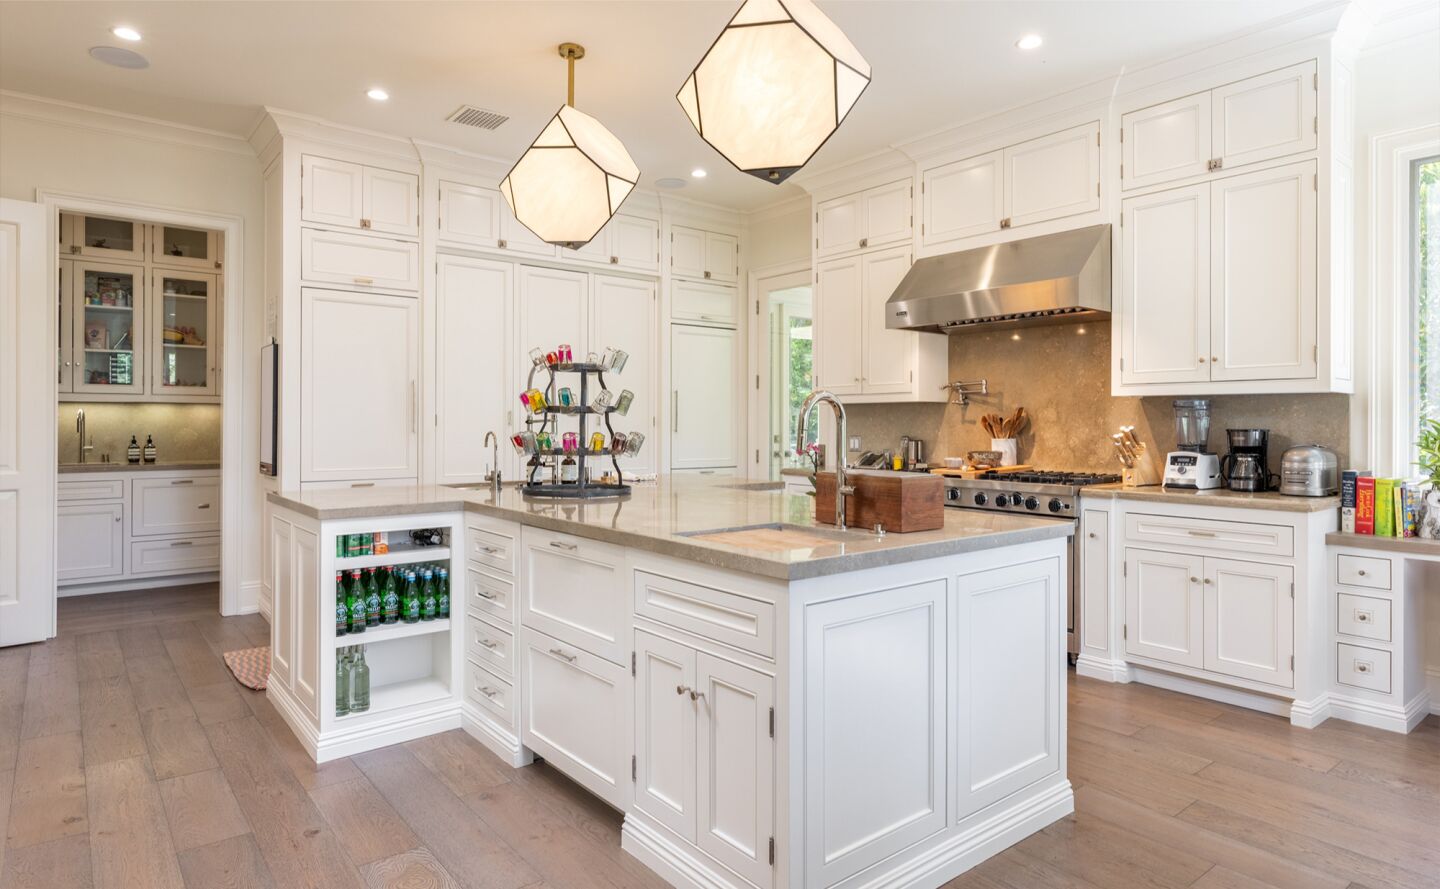 The kitchen is white with overhead lighting fixtures and an island.